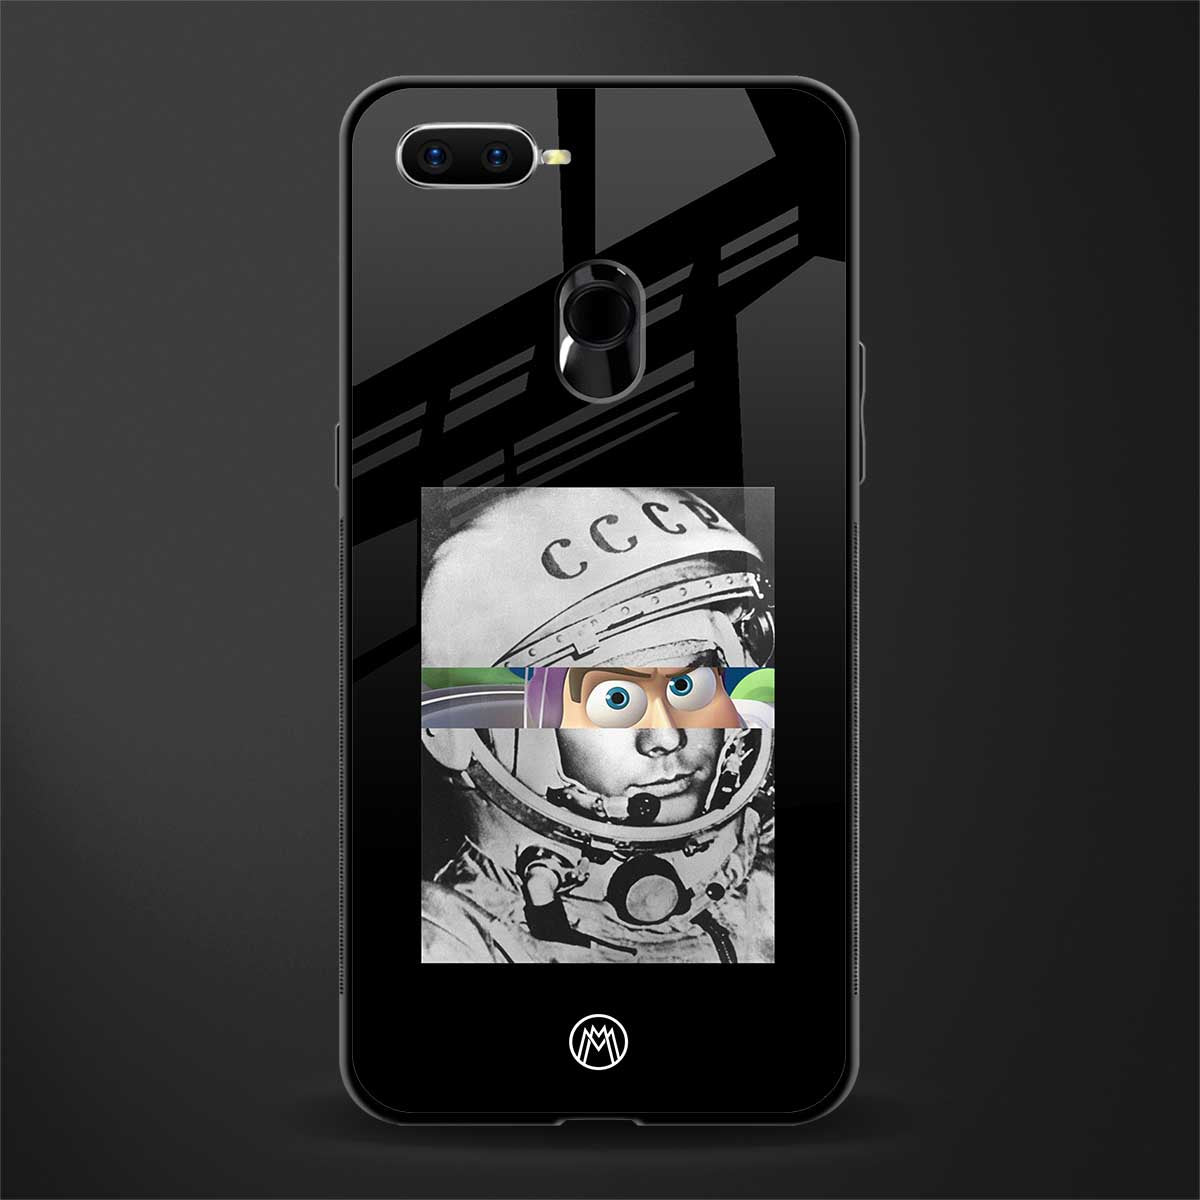 buzz lightyear astronaut mobile glass case for oppo a7 image